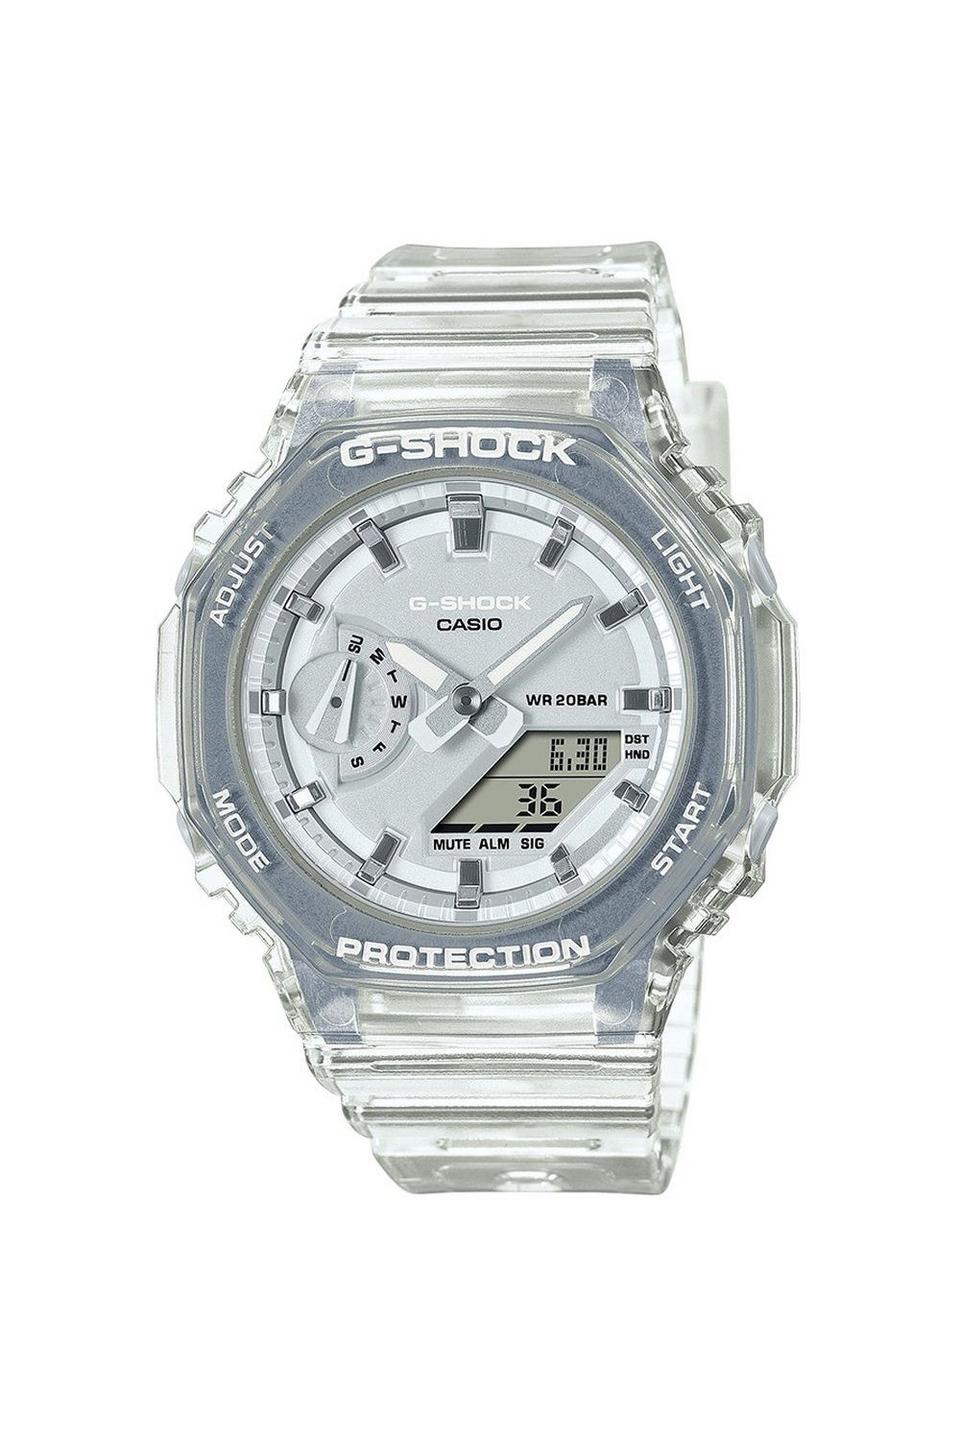 Watches | G-Shock Plastic/resin Classic Analogue Watch - Gma-S2100Sk ...